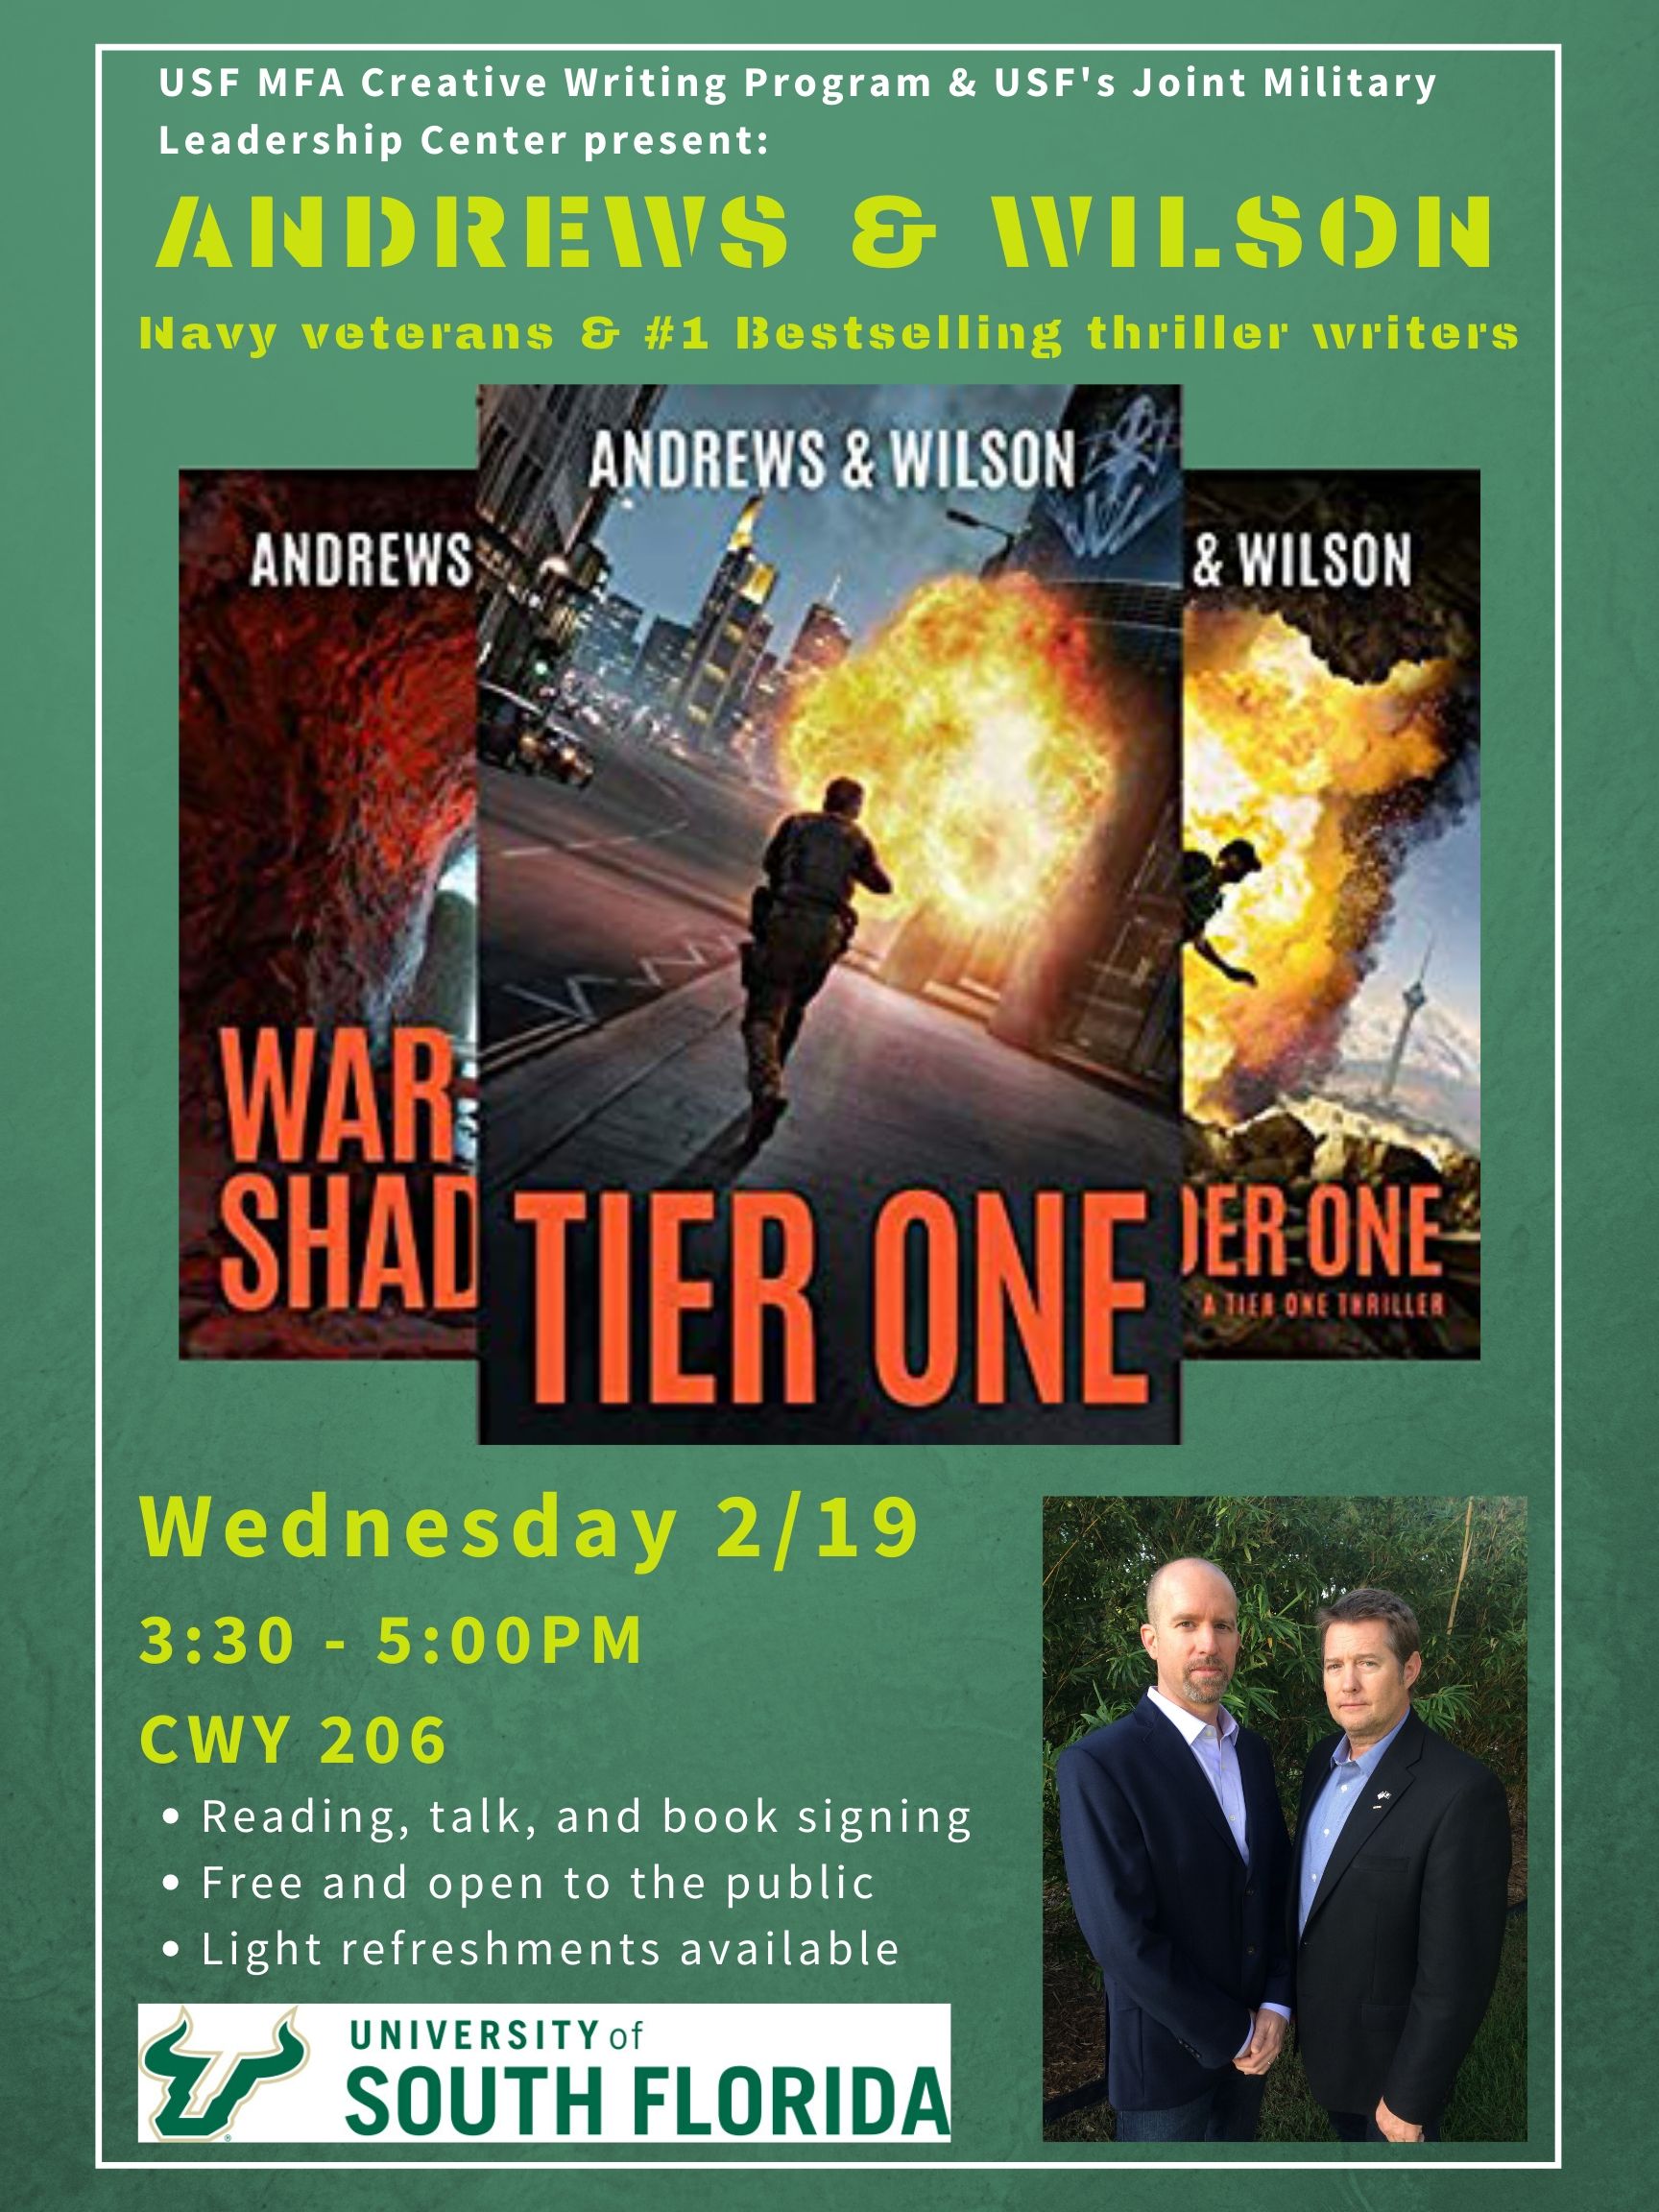 Flyer for Book Talk "Tier One" by Andrews & Wilson, February 18 at 3:30pm in CWY 206